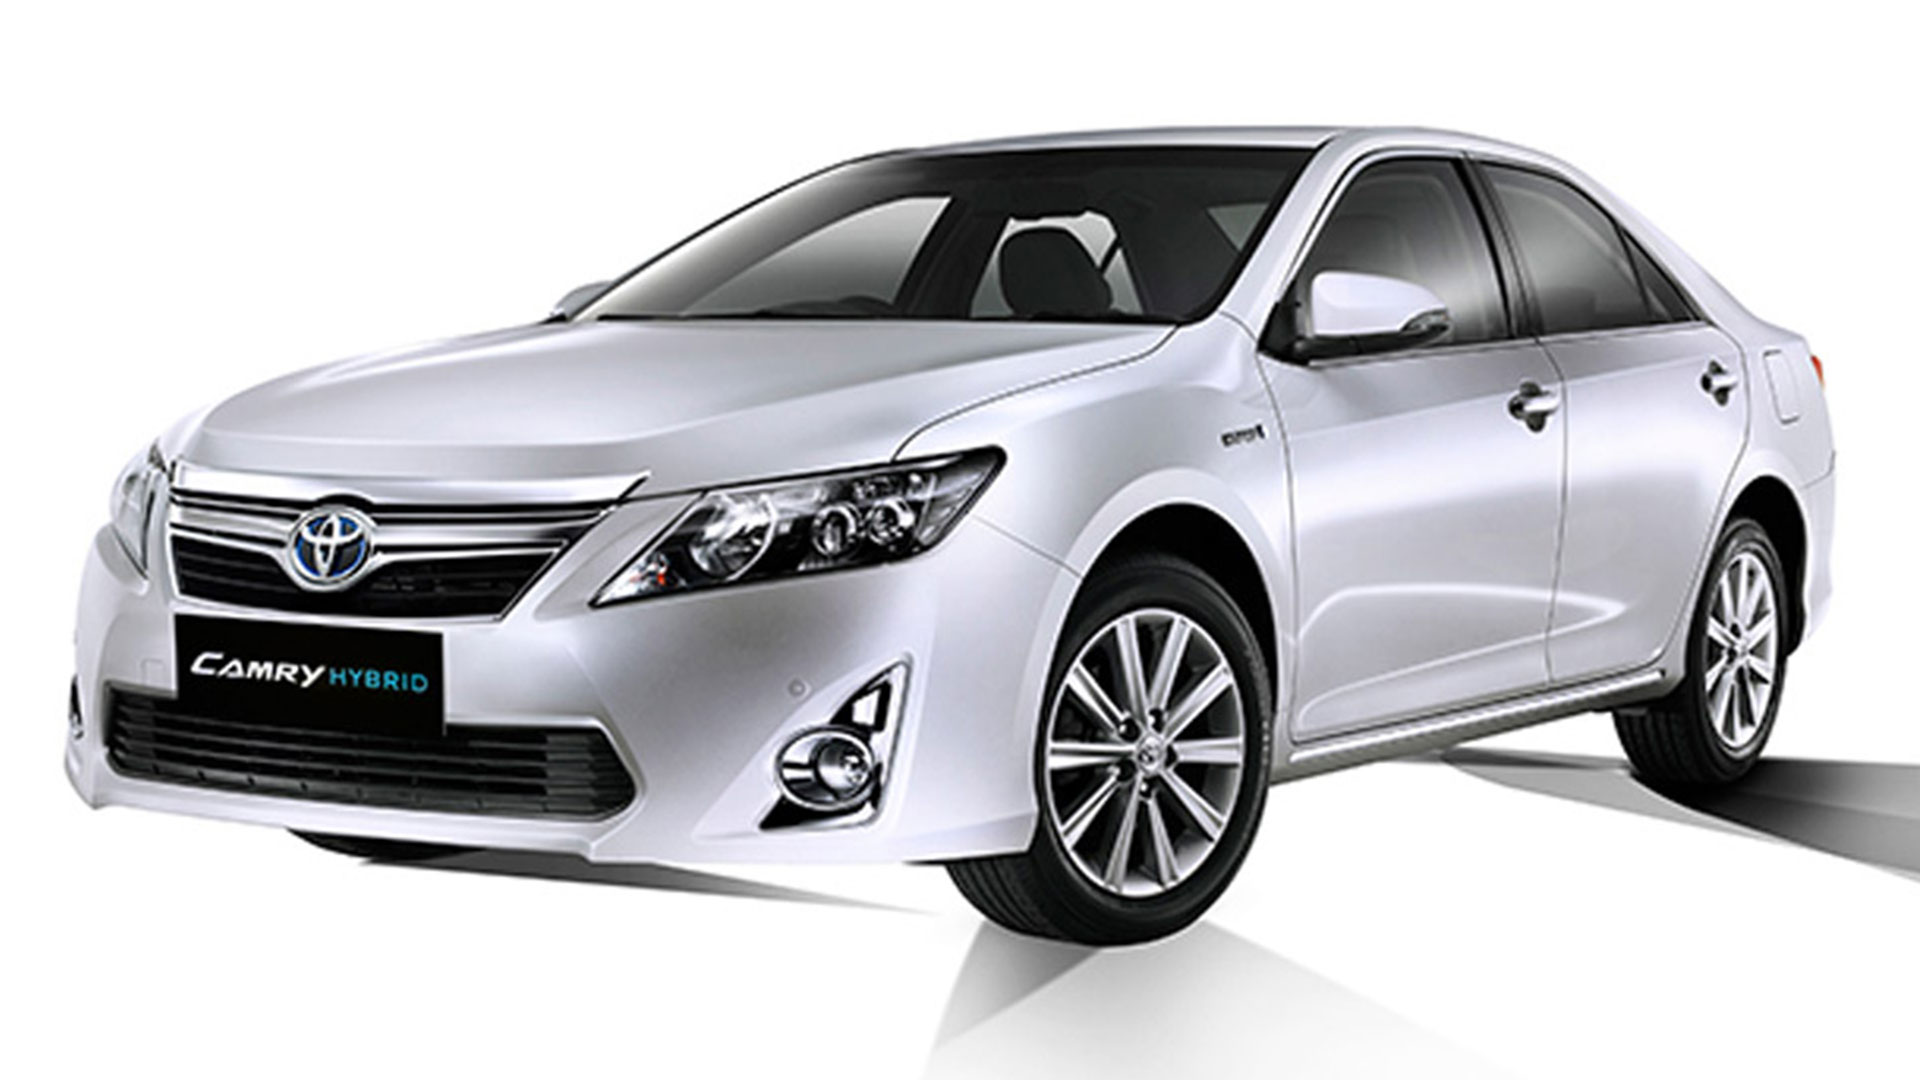 2014 Toyota Camry Hybrid: A Good Excuse For A Little Extra Driving – A  Girls Guide to Cars